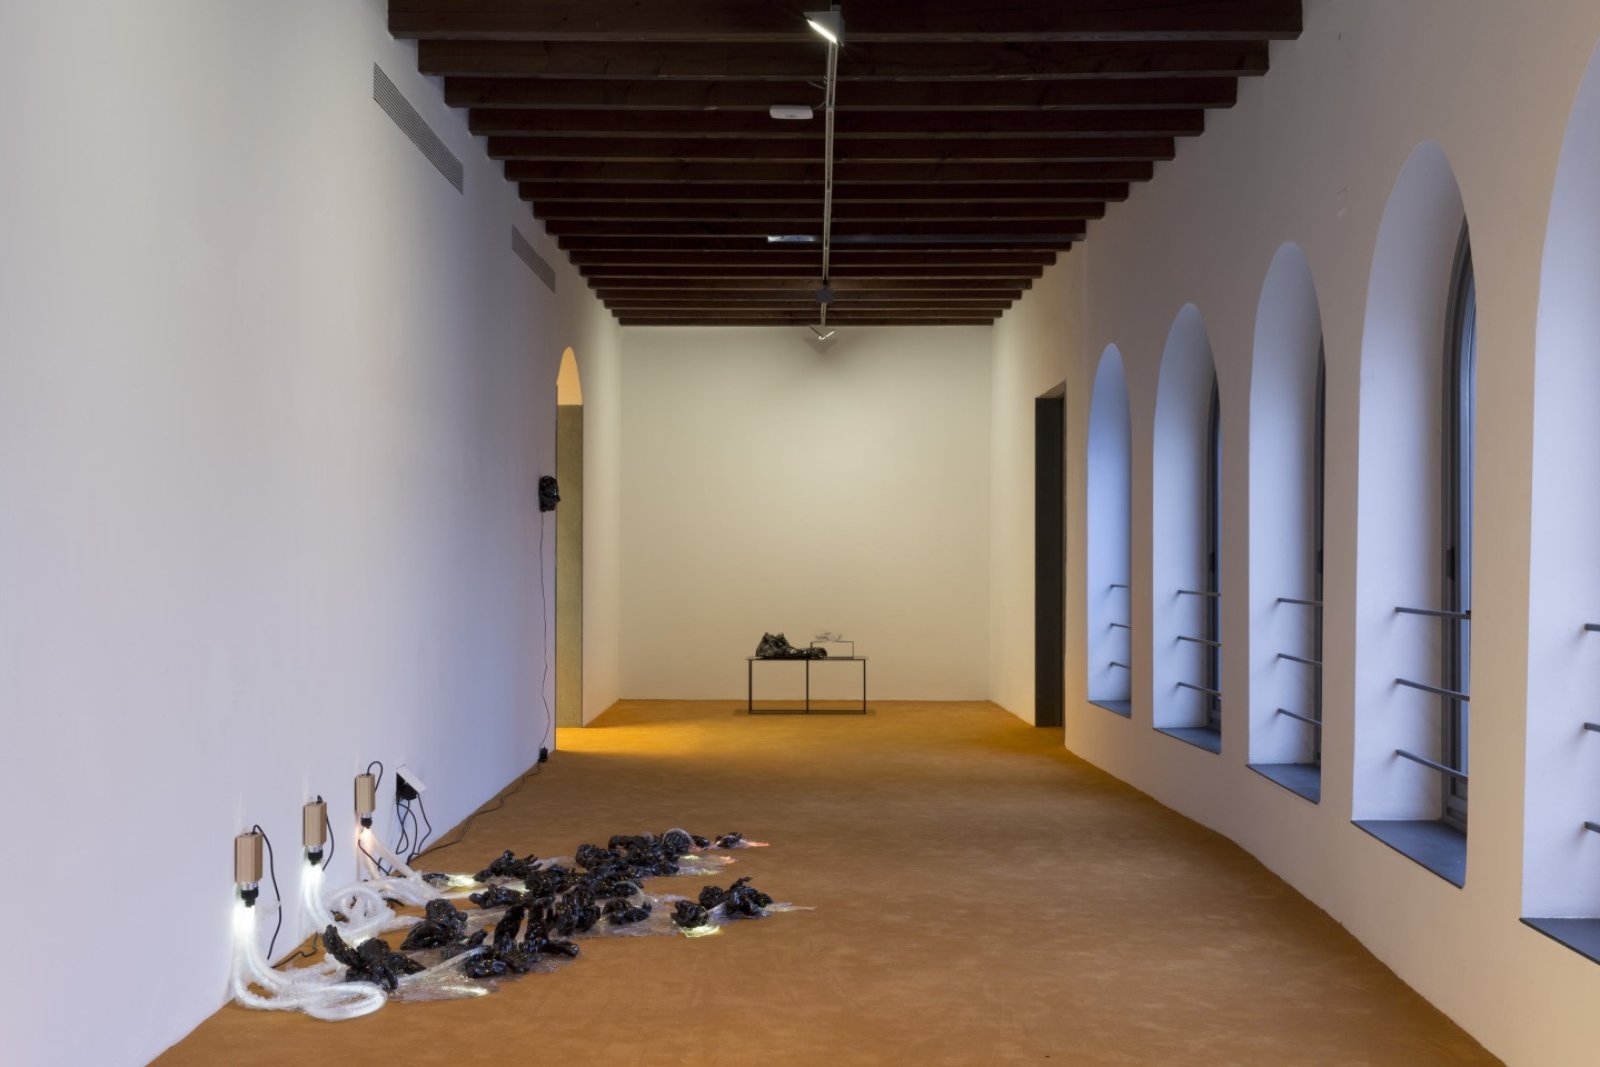 Rochelle Goldberg, Hands Replace the Deck, 2016, ceramic, fibre-optic cables, resin, LED illuminator, plastic, dimensions variable. Installation view, No Where, Now Here, GAMeC, Bergamo, Italy, 2016